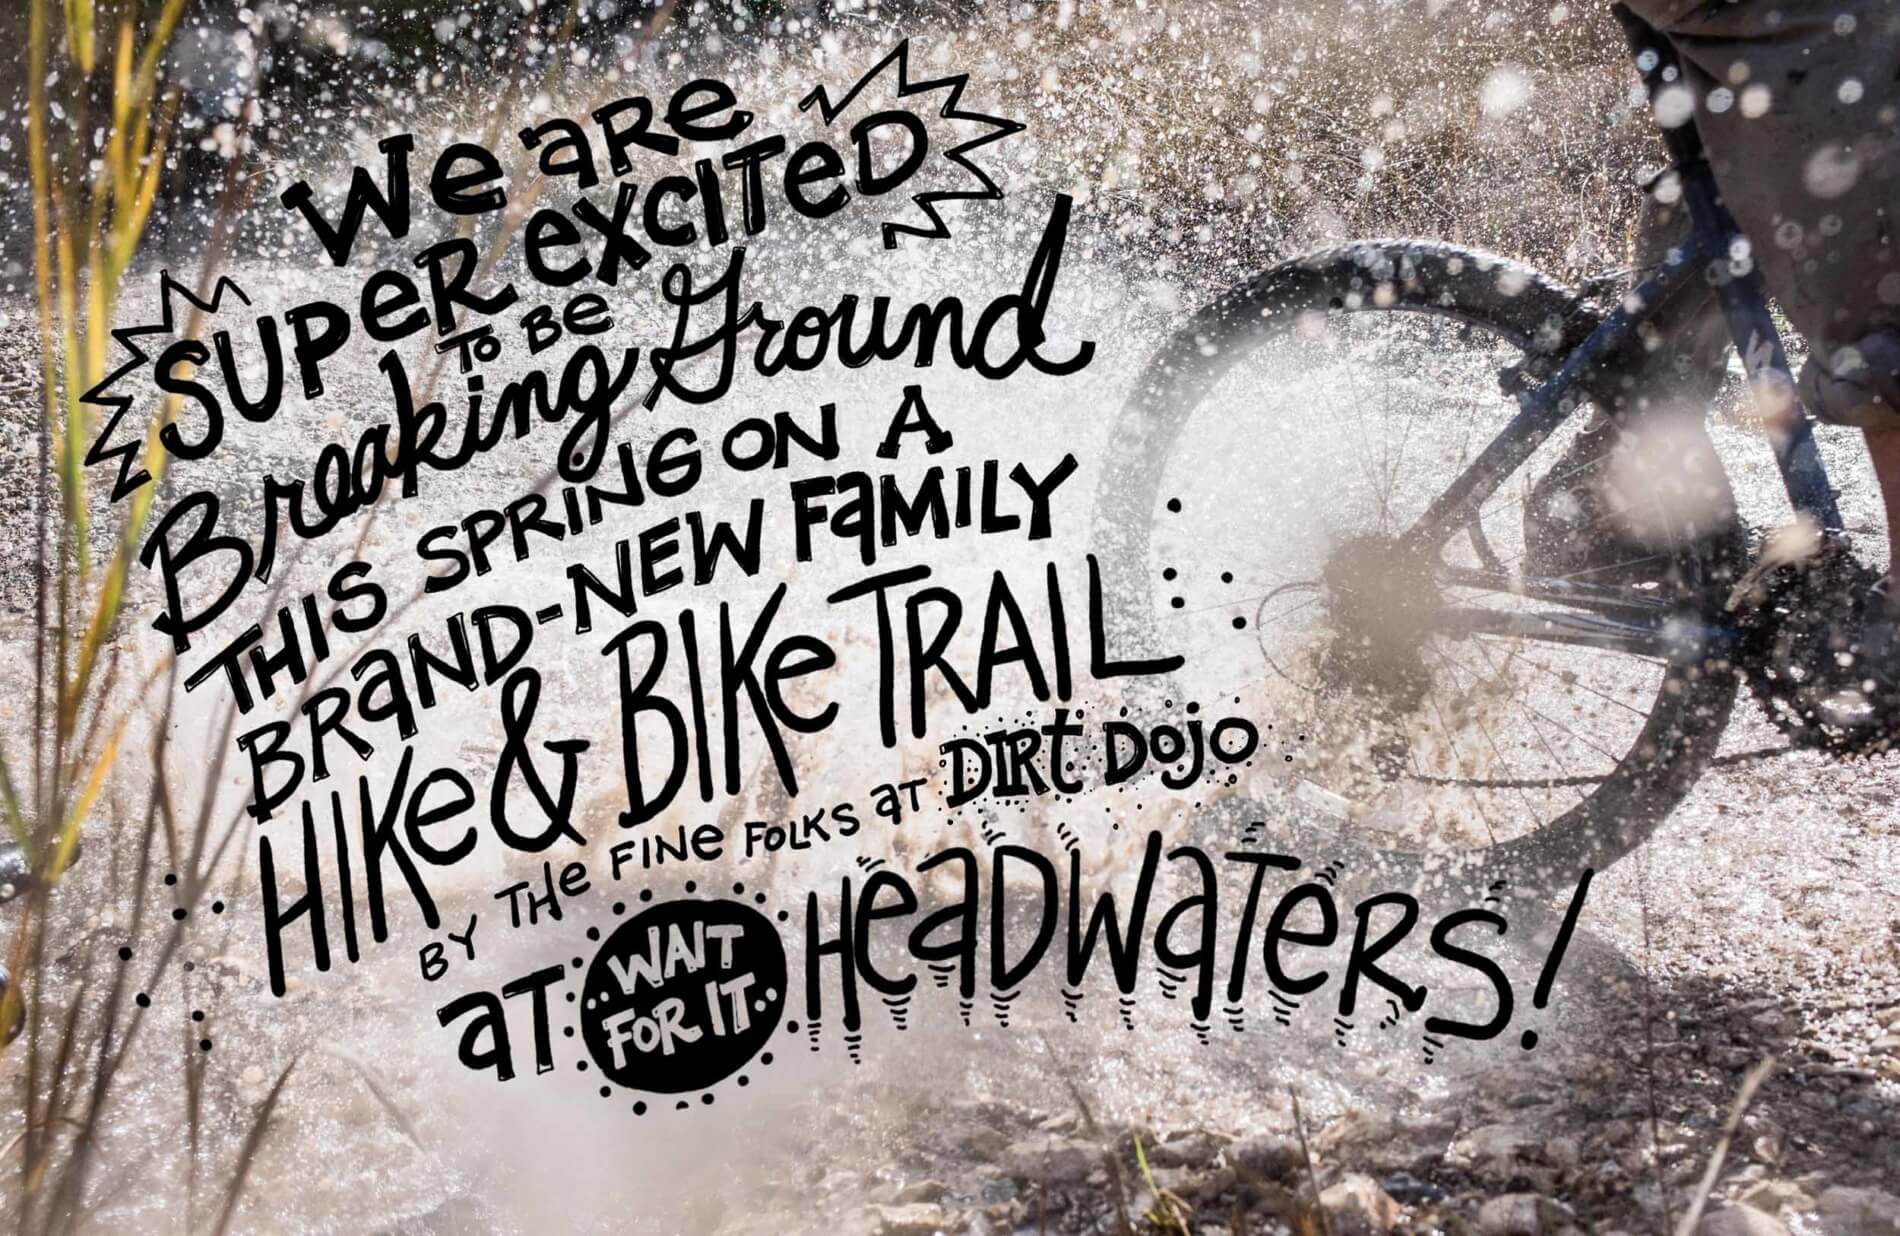 We are super excited to be breaking ground this spring on a brand-new family hike & bike trail by the fine folks at Dirt Dojo at (wait for it…) Headwaters!